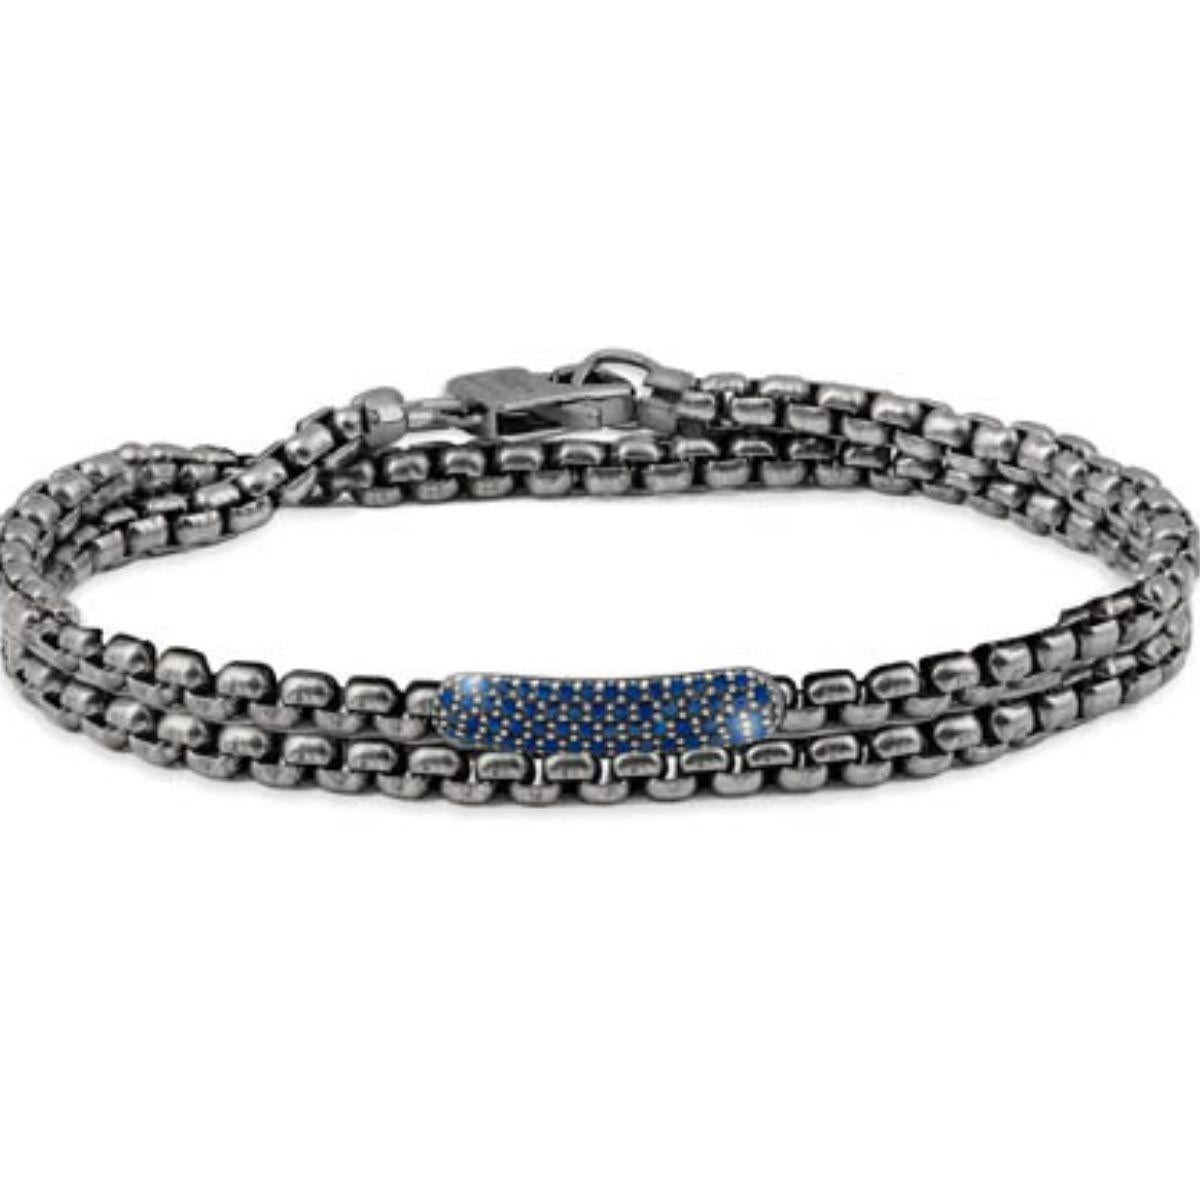 Black Rhodium Plated Sterling Silver Catena Baton Bracelet with Sapphires Size S

The bracelets are handcrafted using carefully selected rare stones and feature a black rhodium-plated sterling silver baton with 0.48cts of sparkling blue sapphires